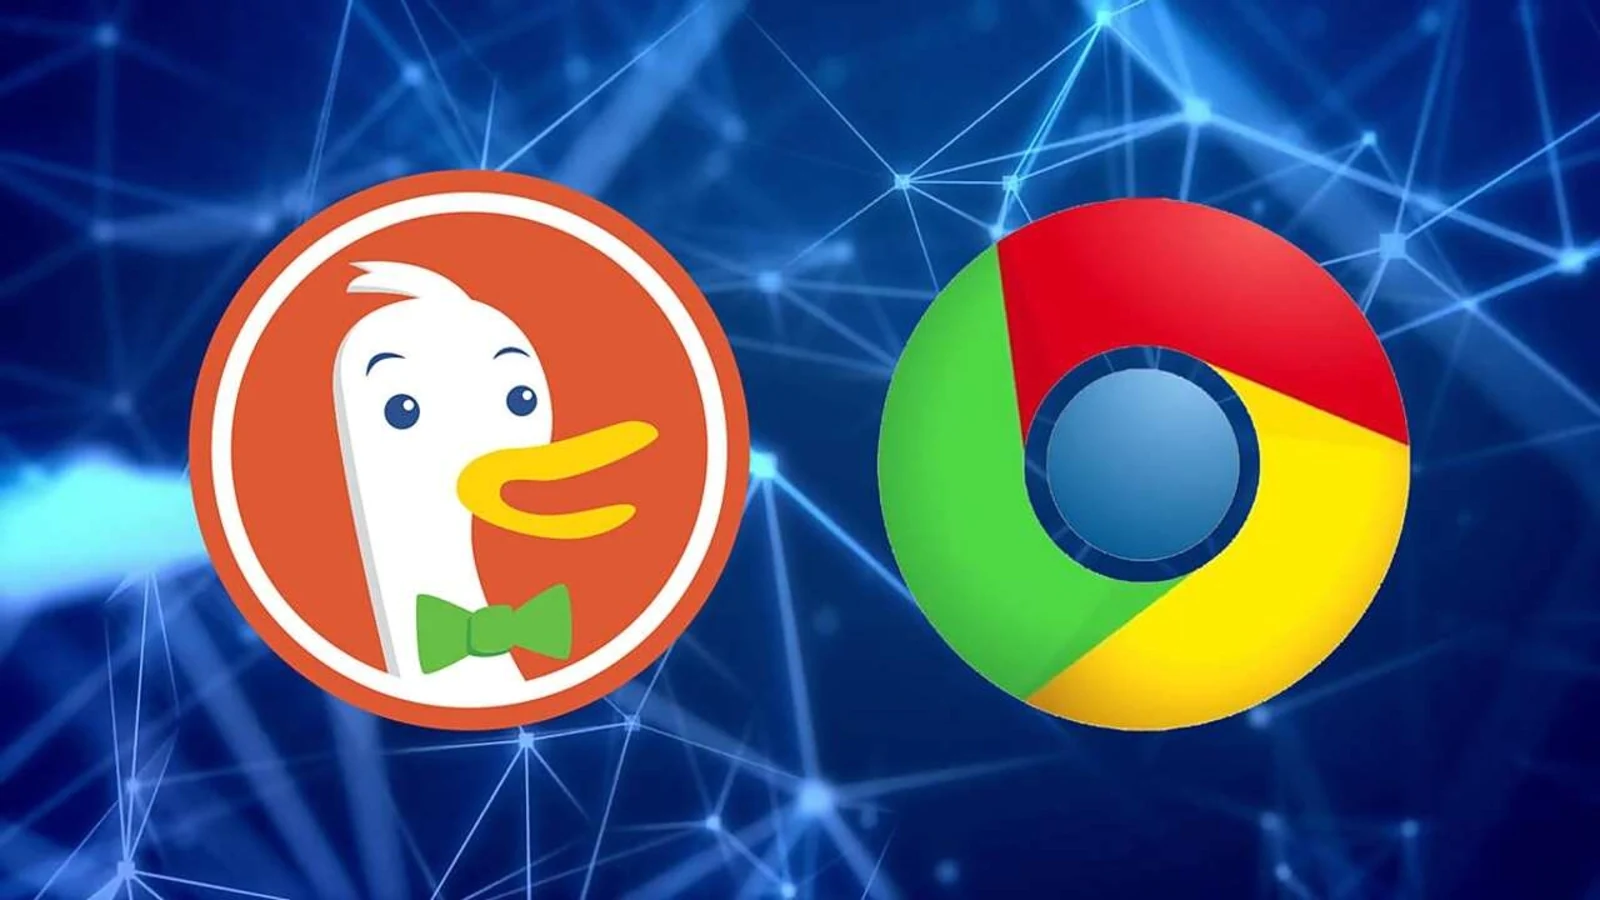 As of now, Google pop-up ads will not appear on the search engine platform 'Duck Duck Go